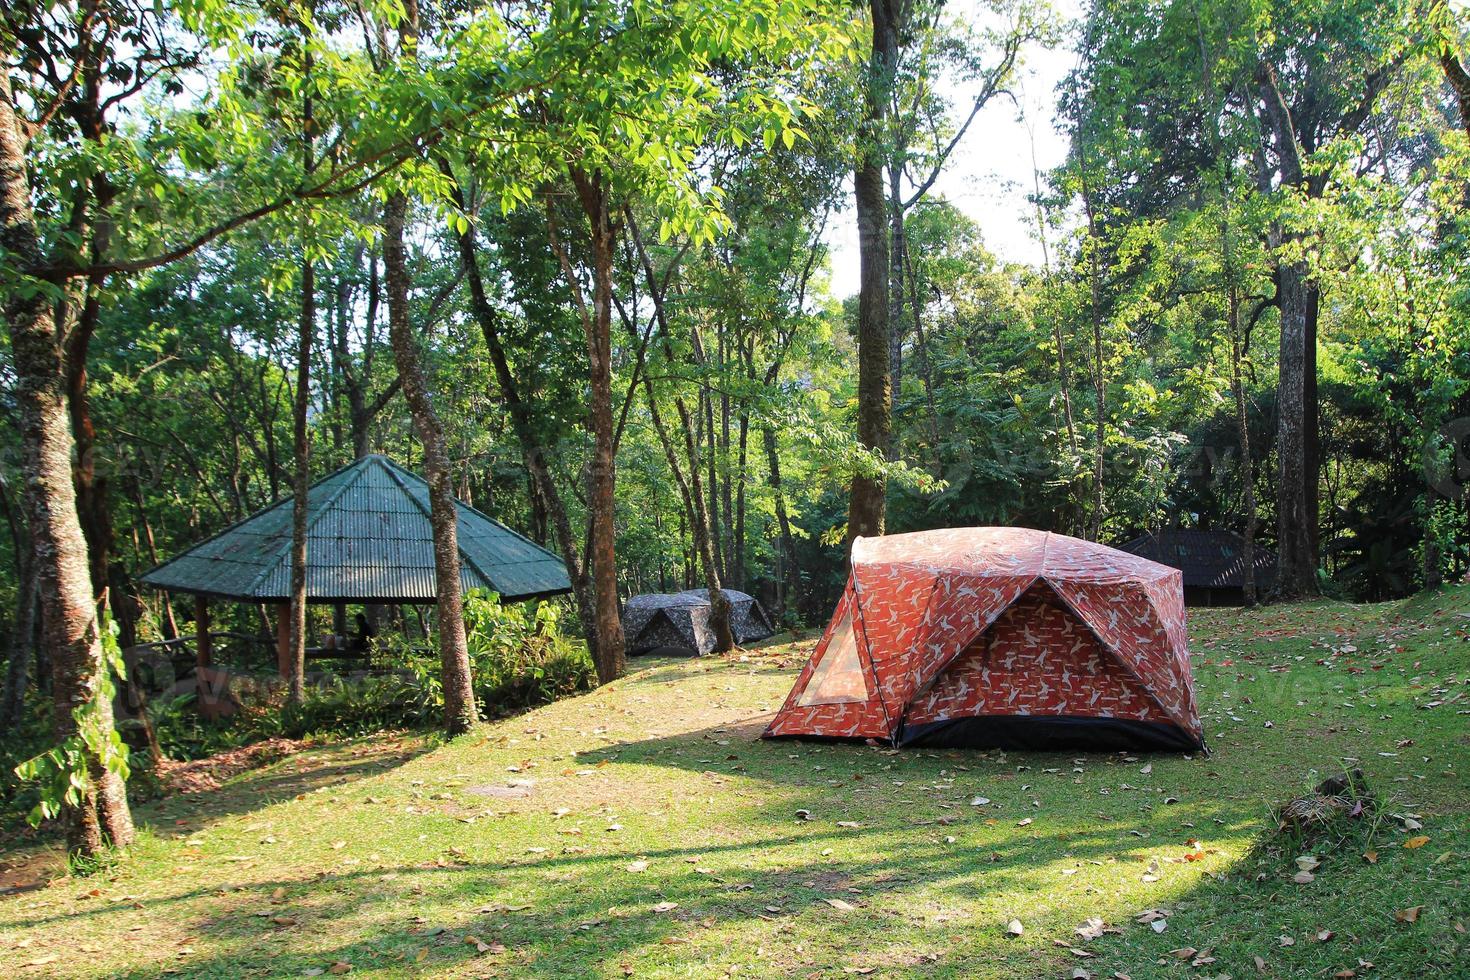 Travel to Doi Suthep national park, Chiang Mai, Thailand. The view on the mountain camping with an alcove and tents in a forest. photo